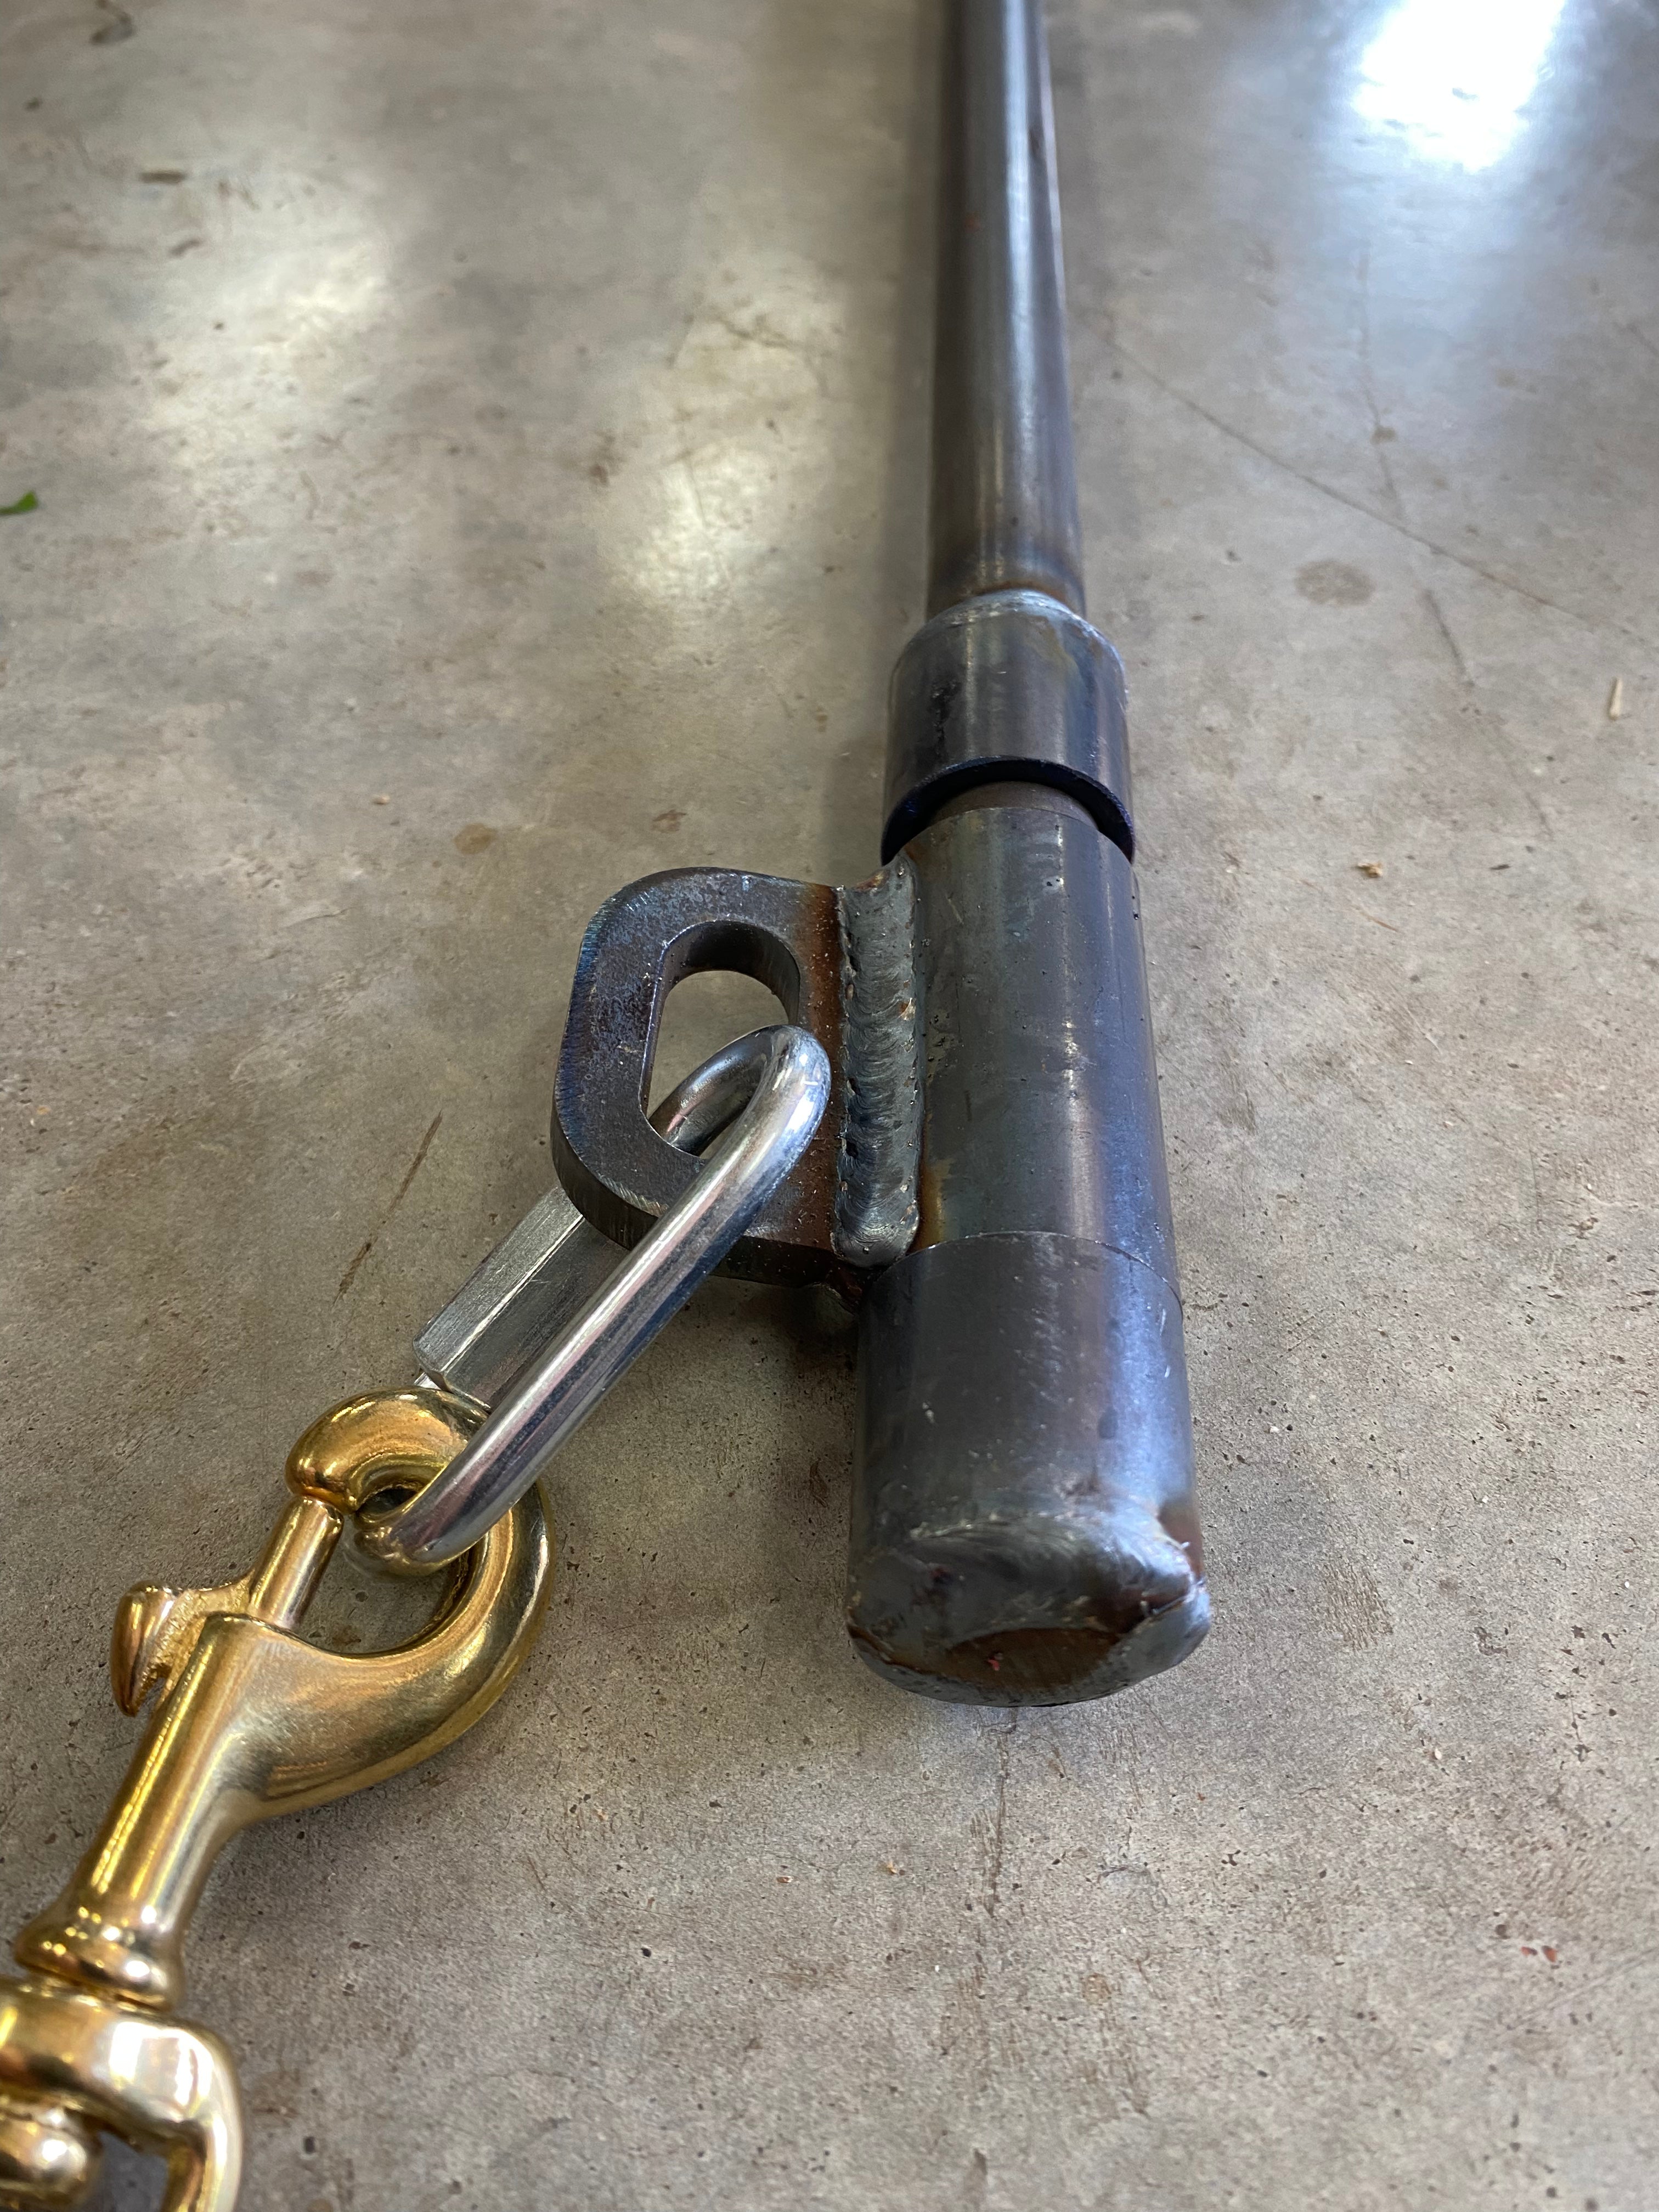 24" x 3/4" Swivel Stake (comes with 24" drop)